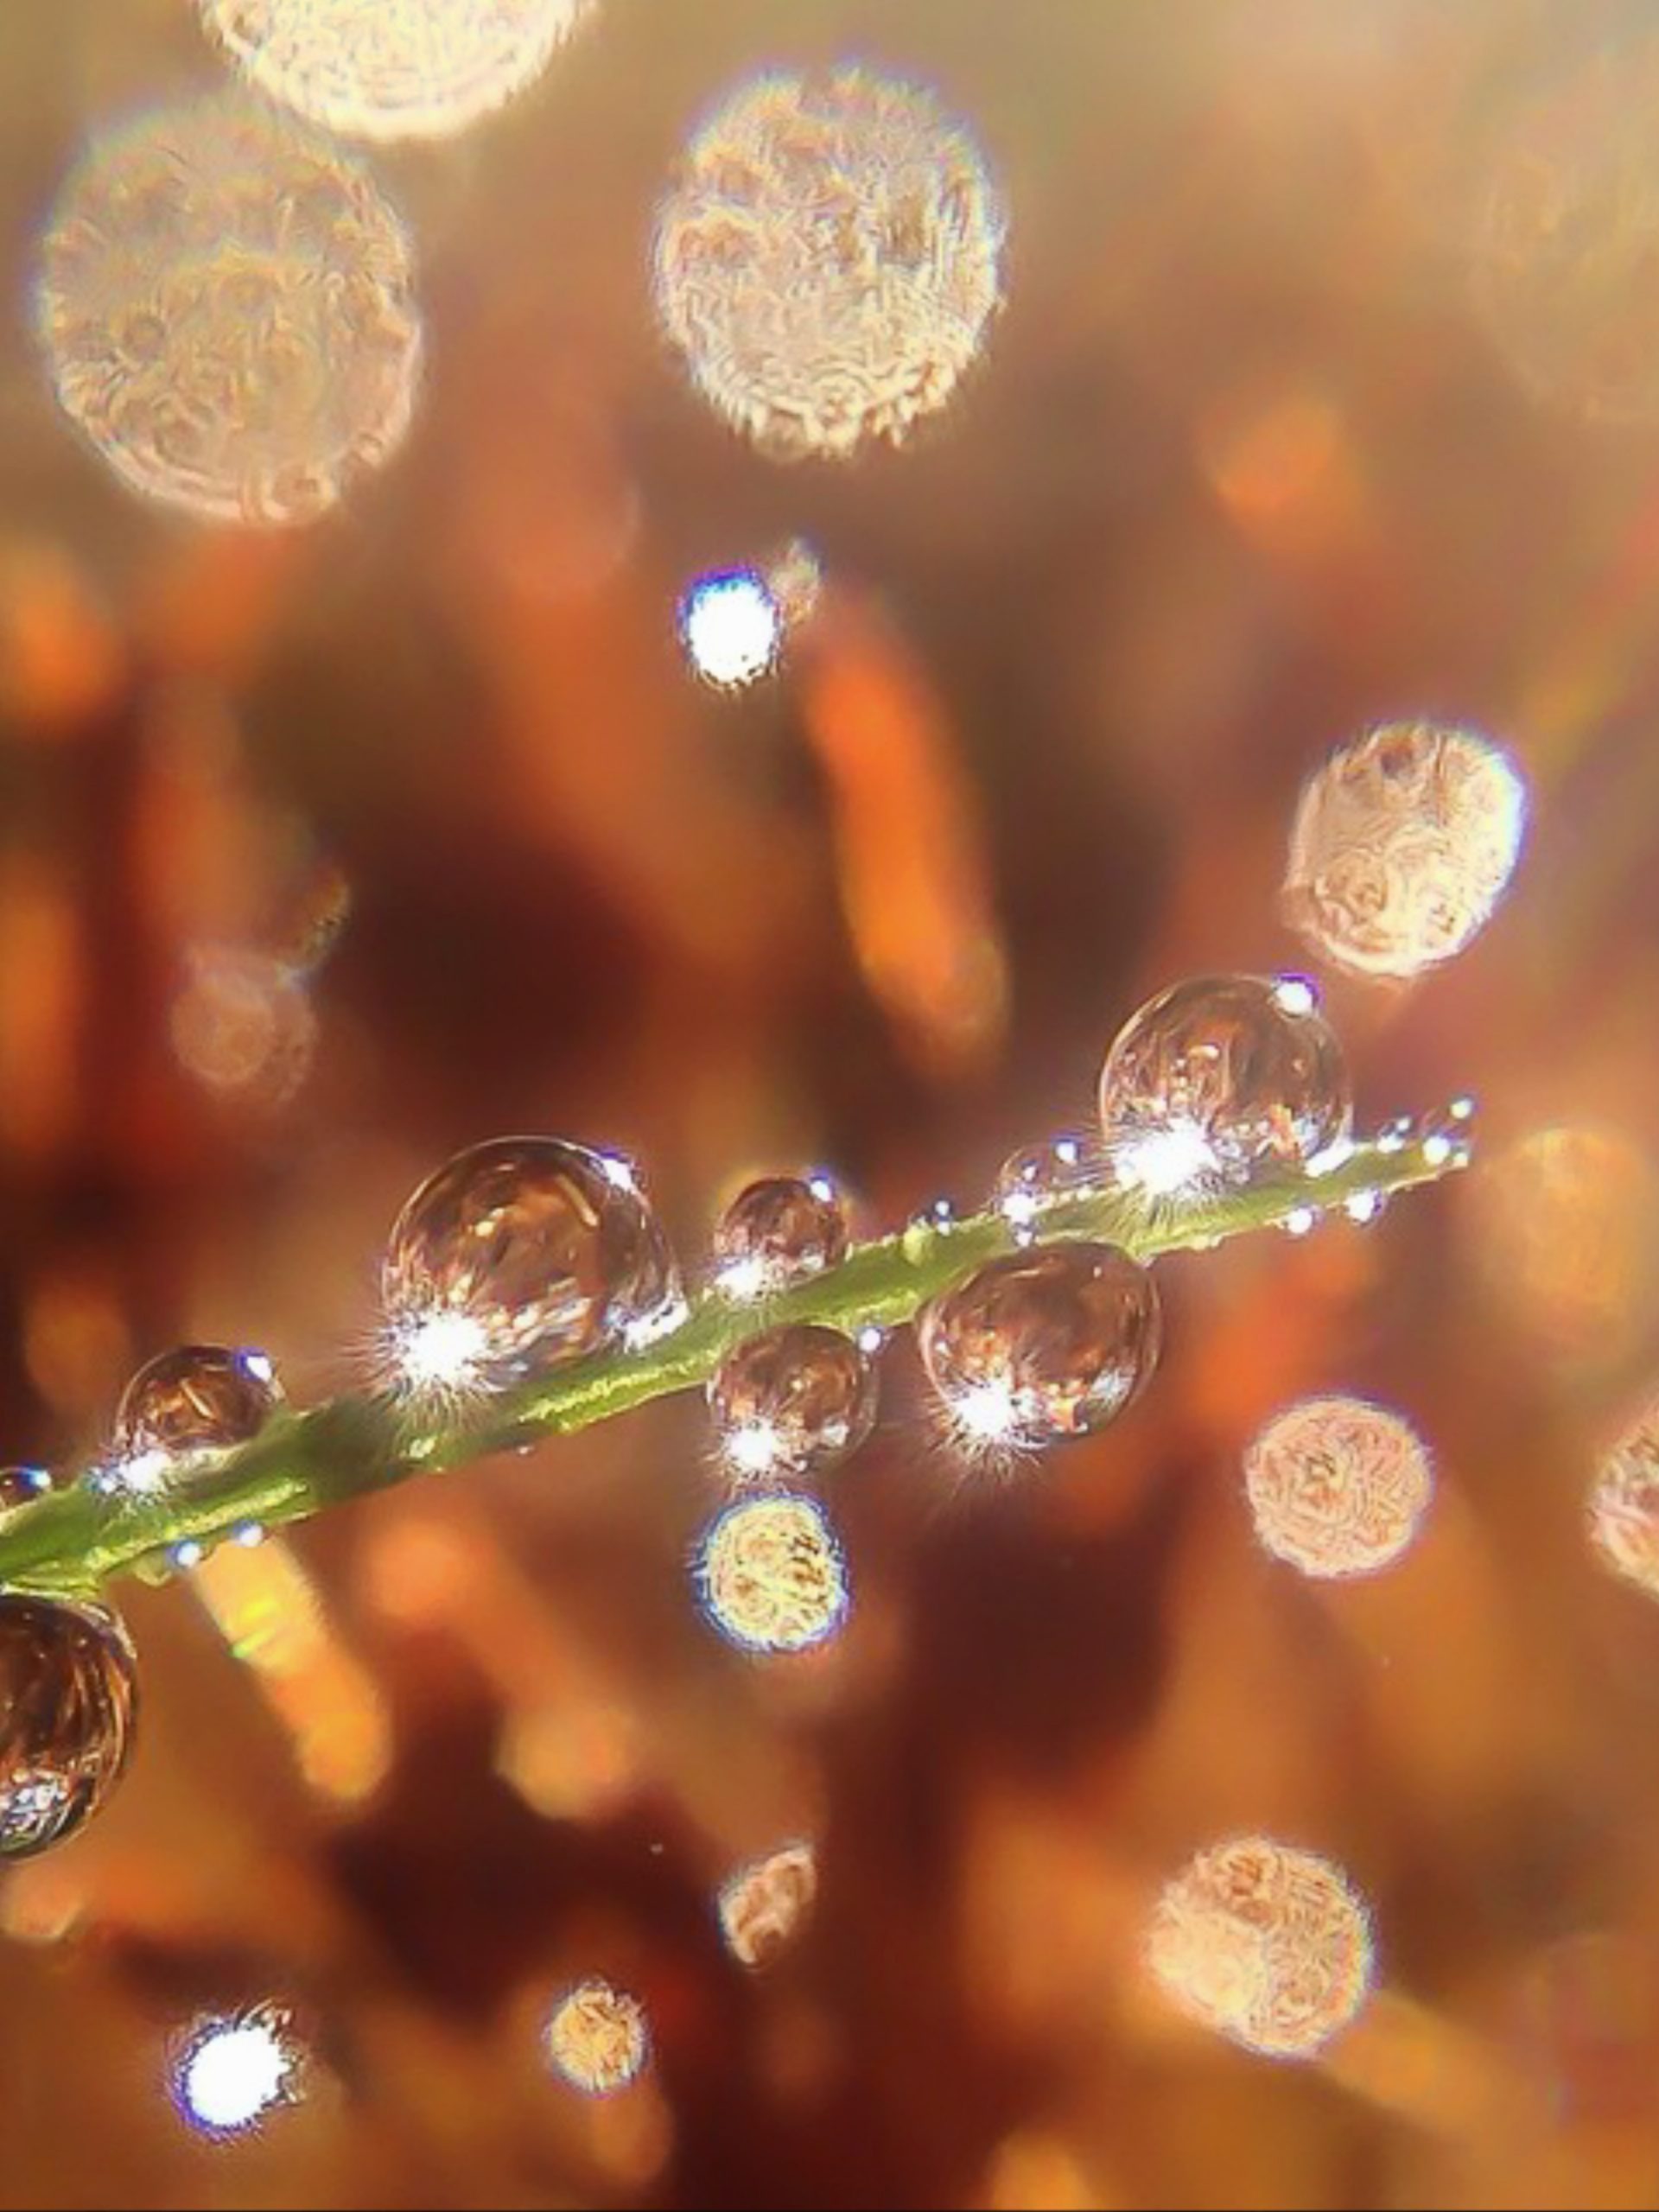 Water drops on a twig